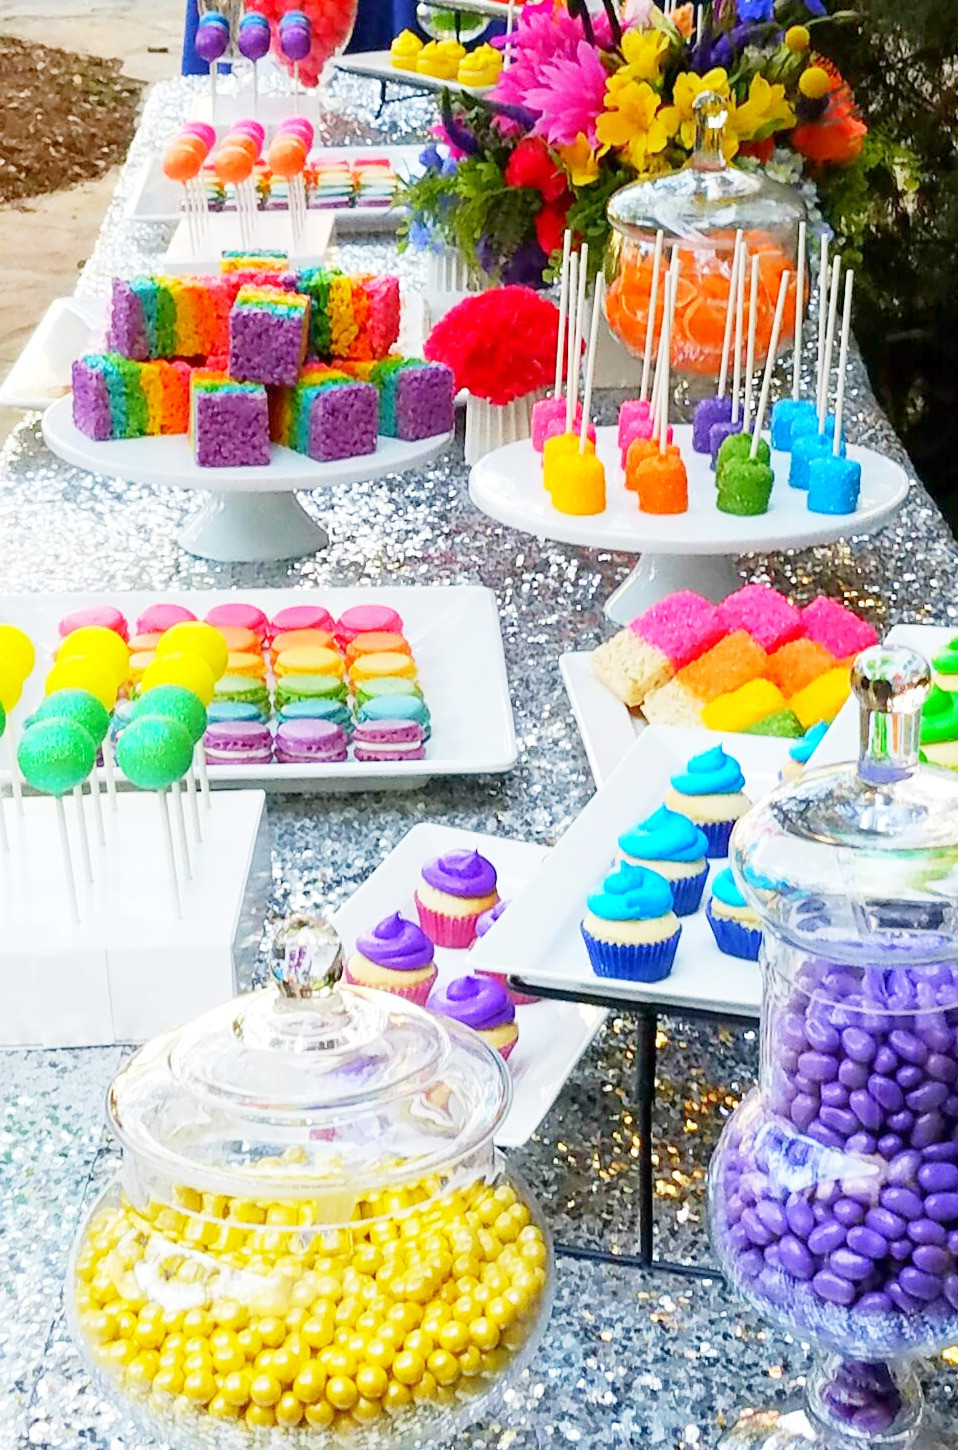 Dreamworks Trolls Party Ideas
 DREAMWORKS TROLLS THE BEAT GOES ON Birthday Party Candy